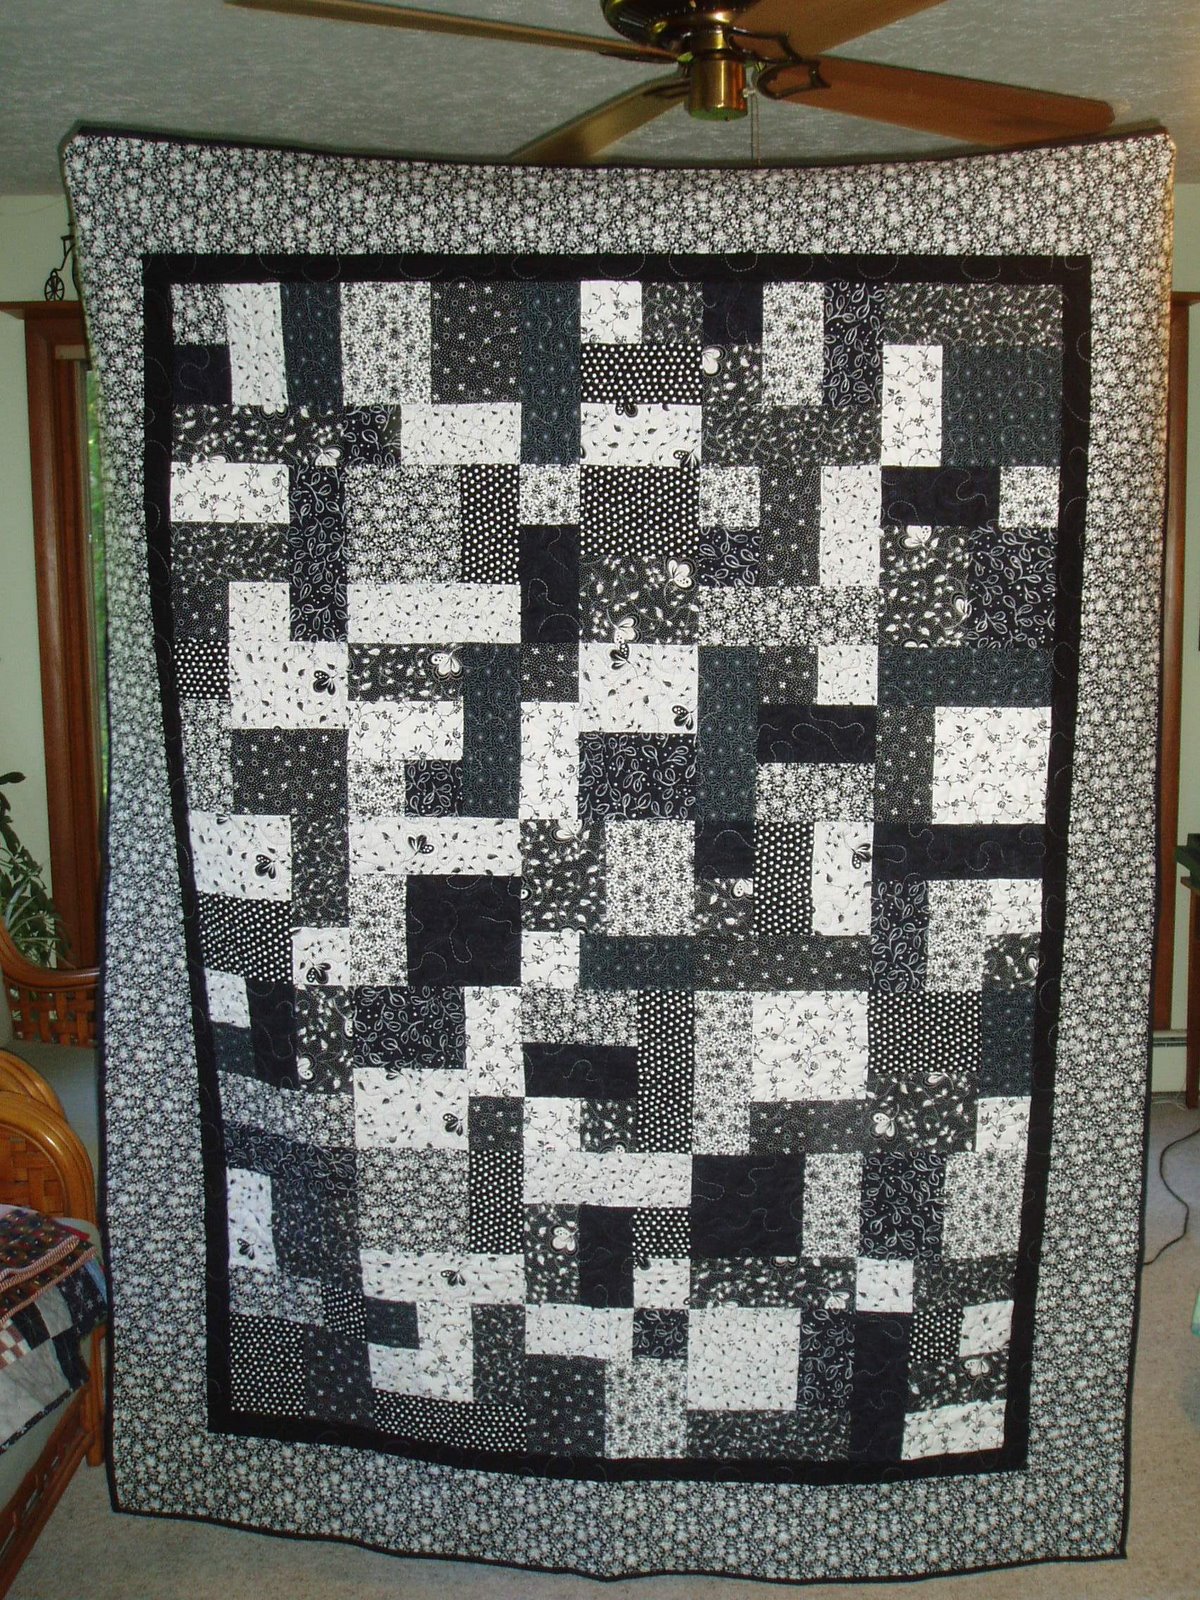 Everyone Deserves a Quilt: More Black and White Quilts